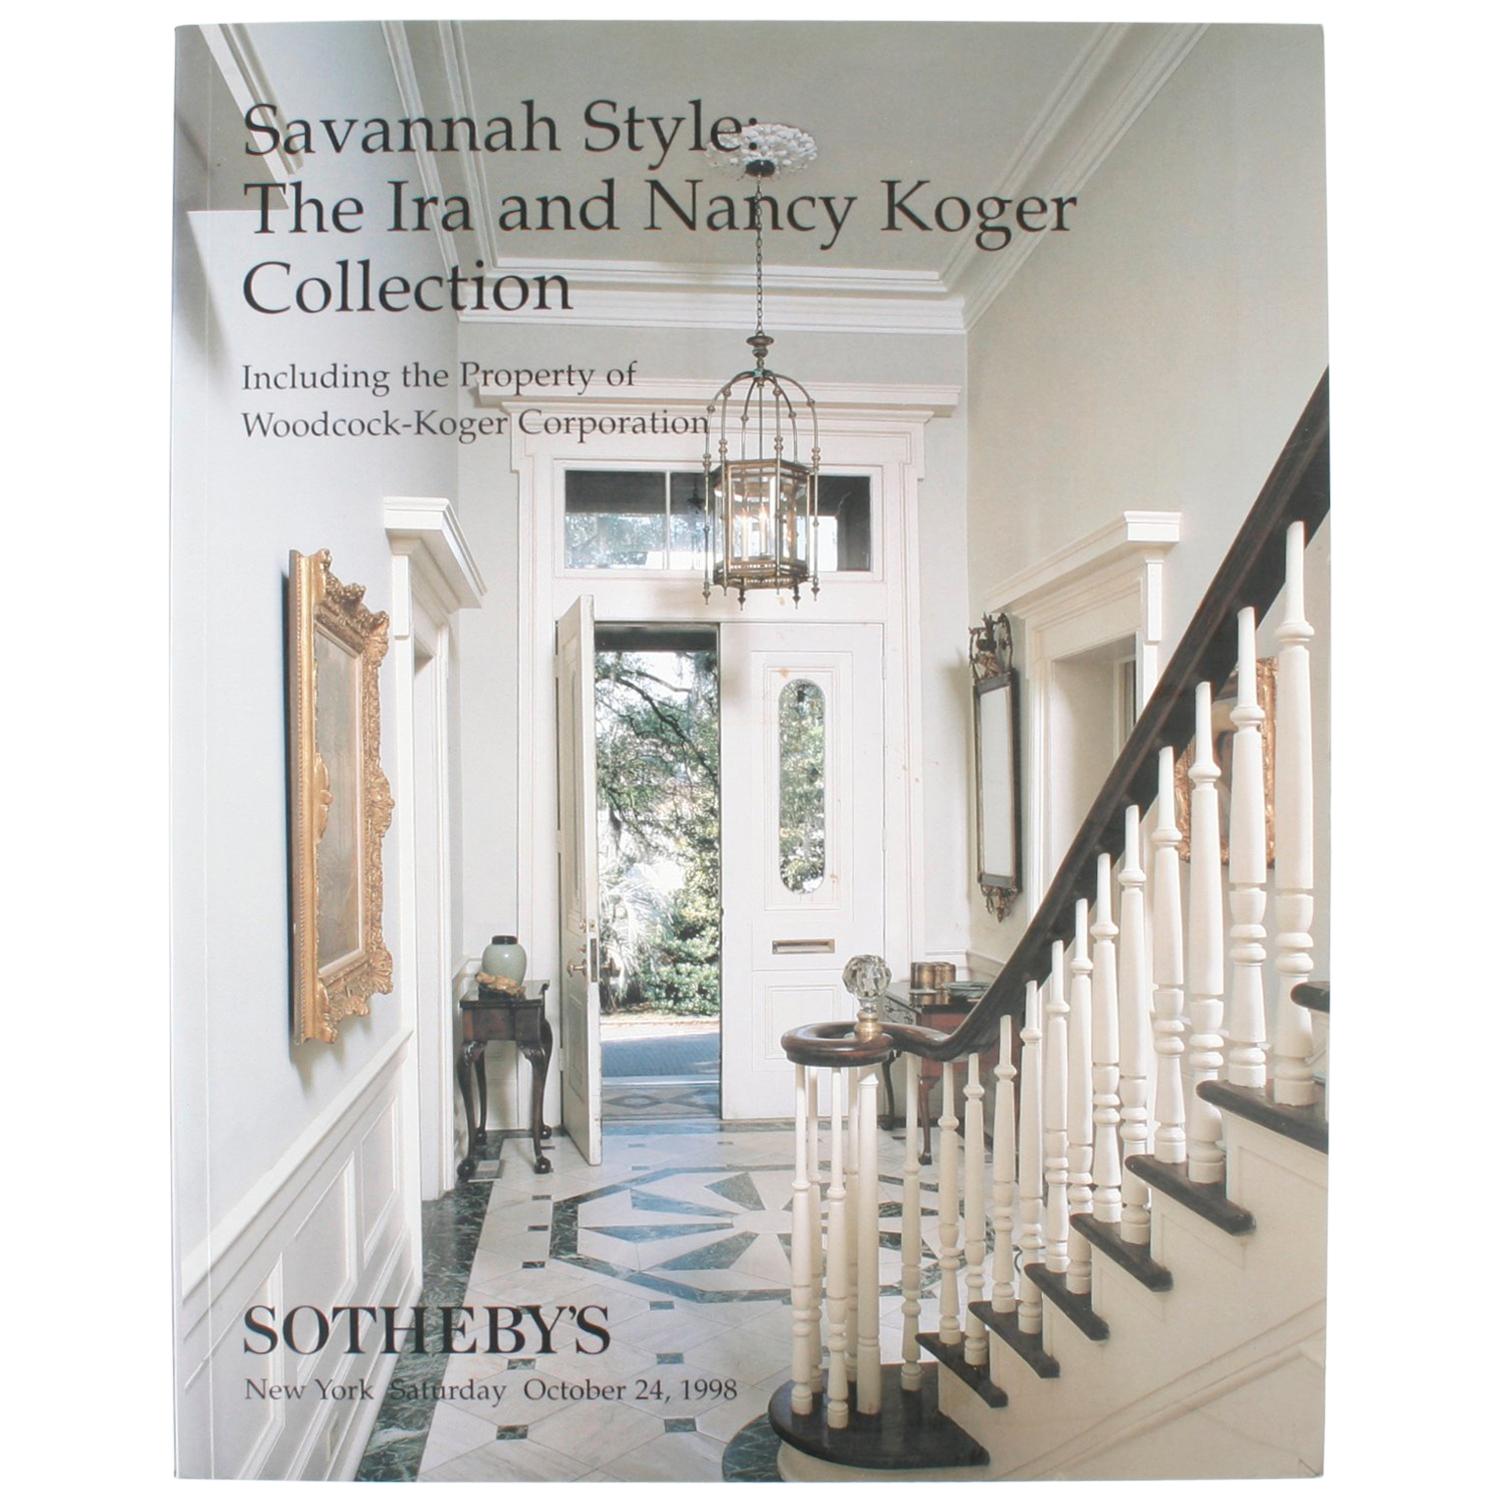 Sotheby's Savannah Style, the Ira and Nancy Koger Collection, 10/24/1998